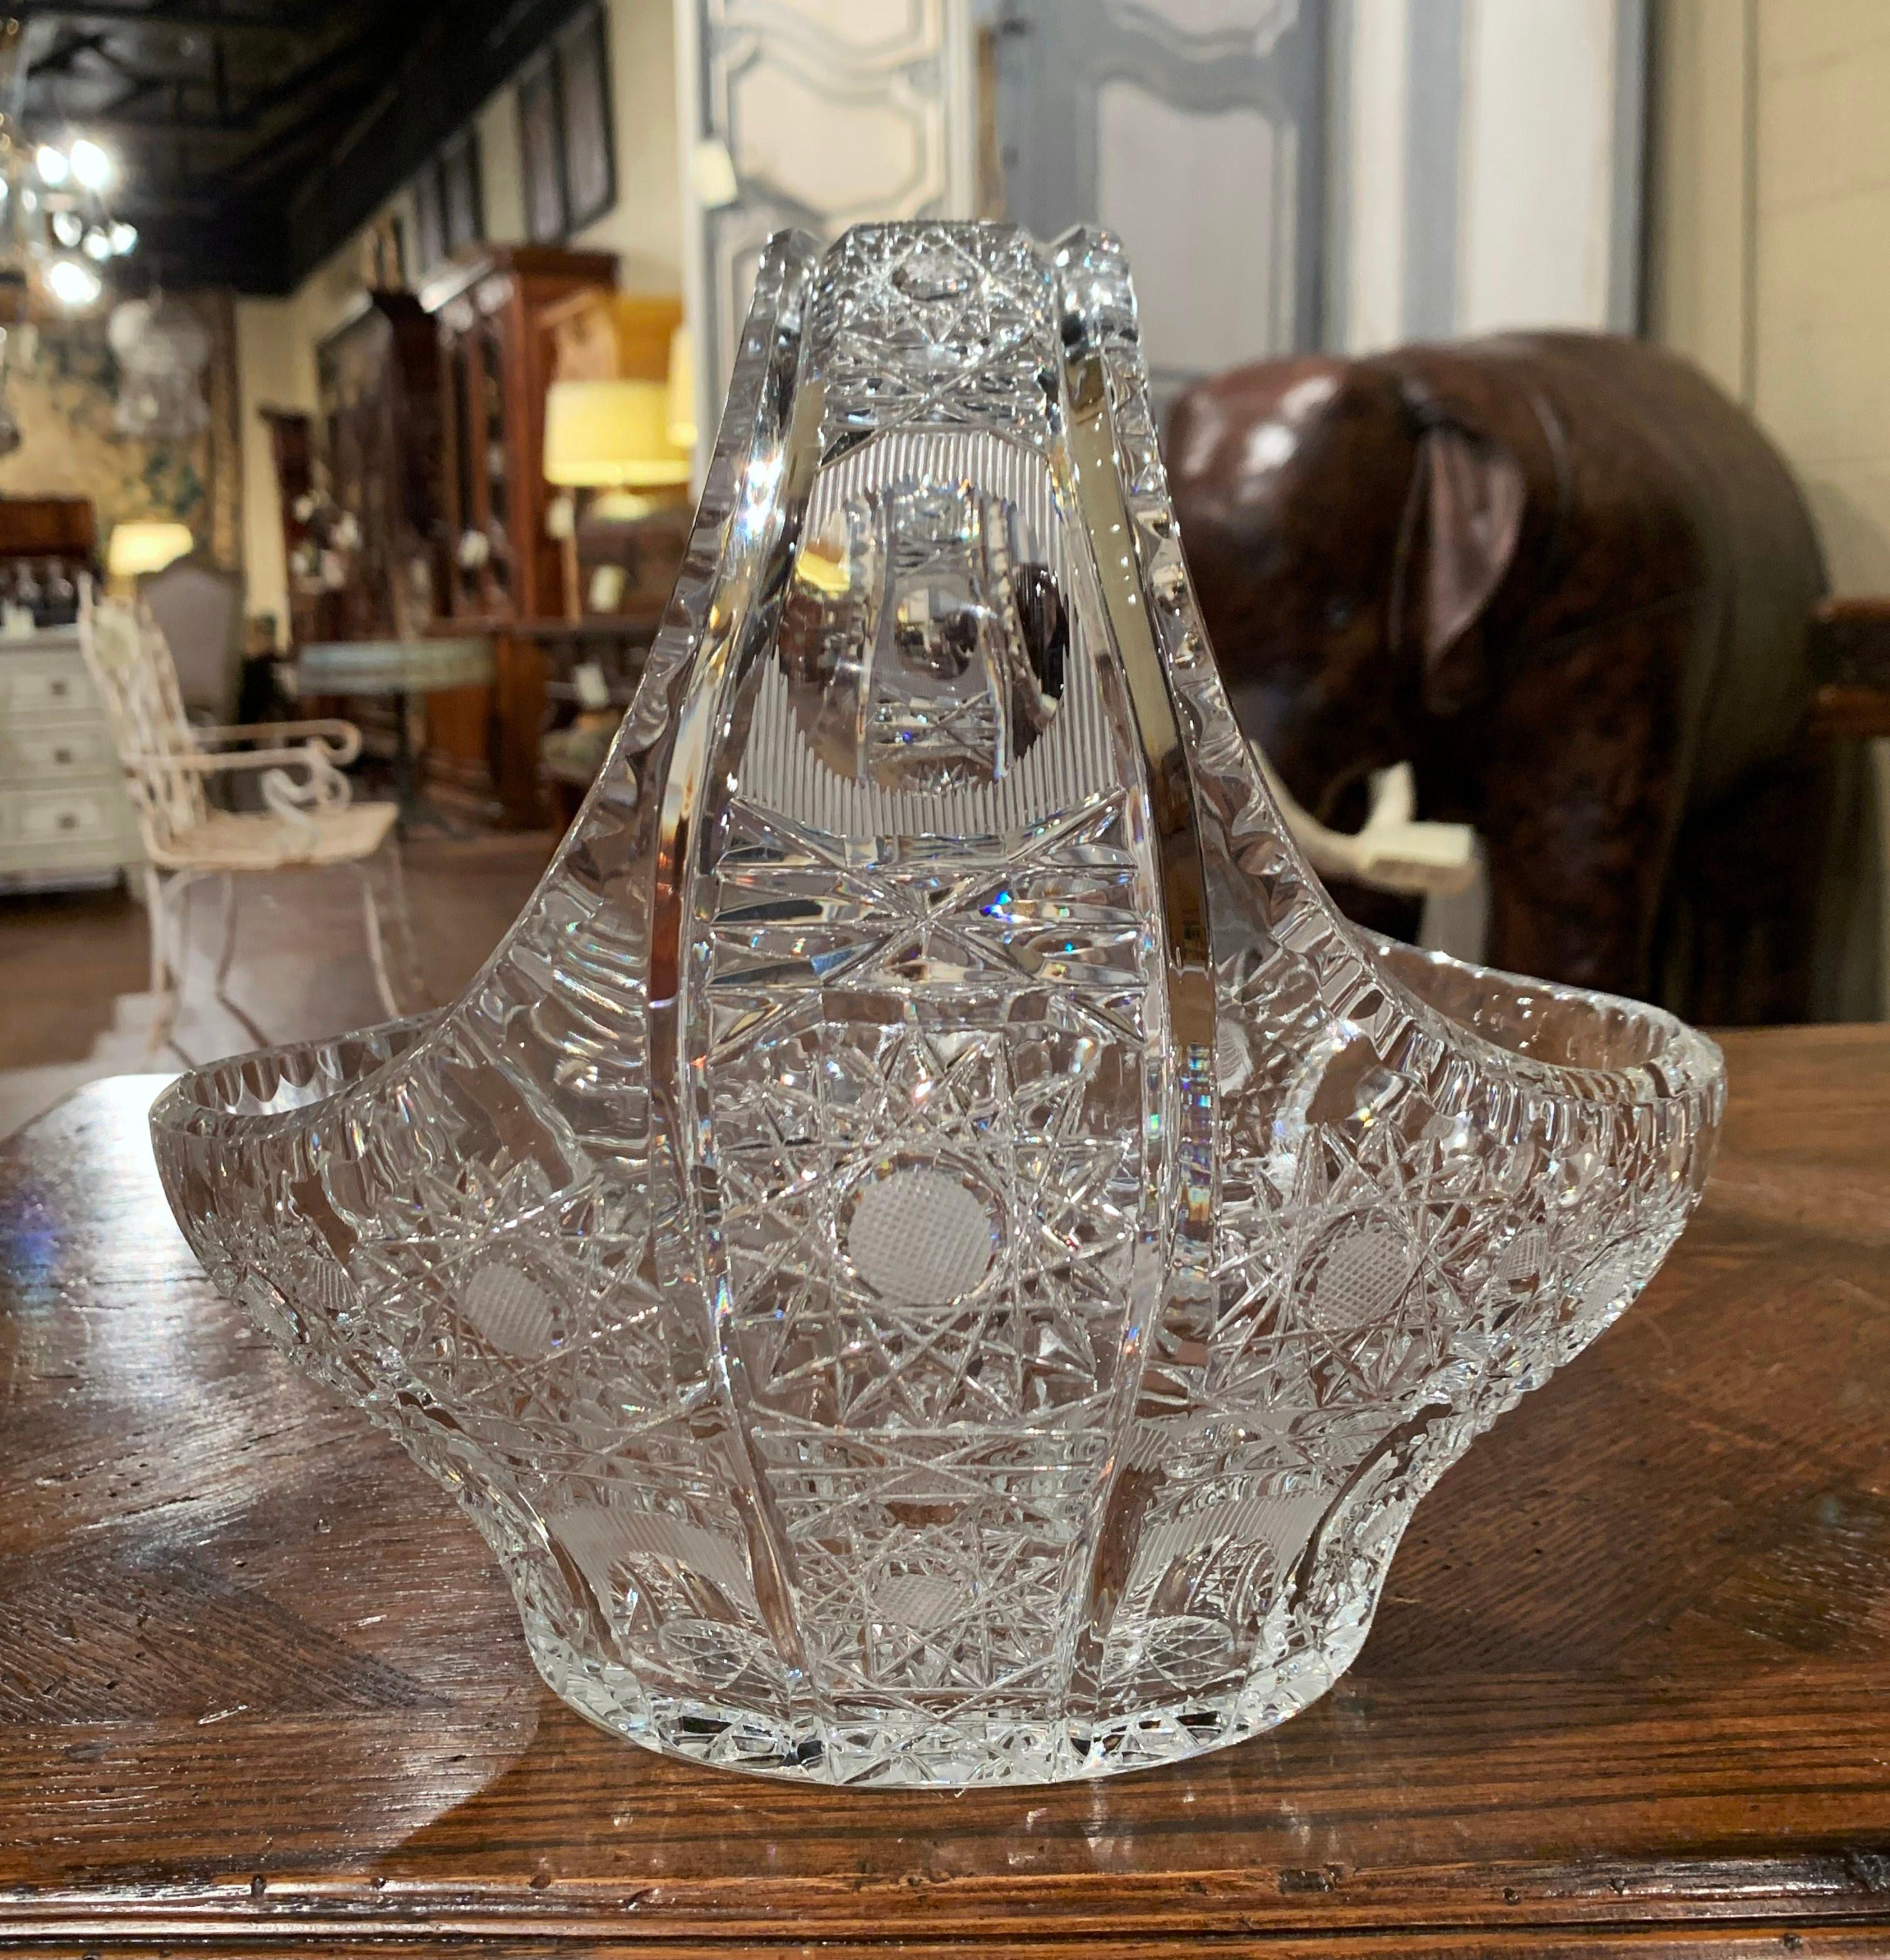 Fill up this elegant basket with candies or fresh flowers. Crafted in France circa 1960, the basket with cut glass decor is oval in shape and features a large handle. The decorative bowl is in excellent condition.
Measures: 9.5